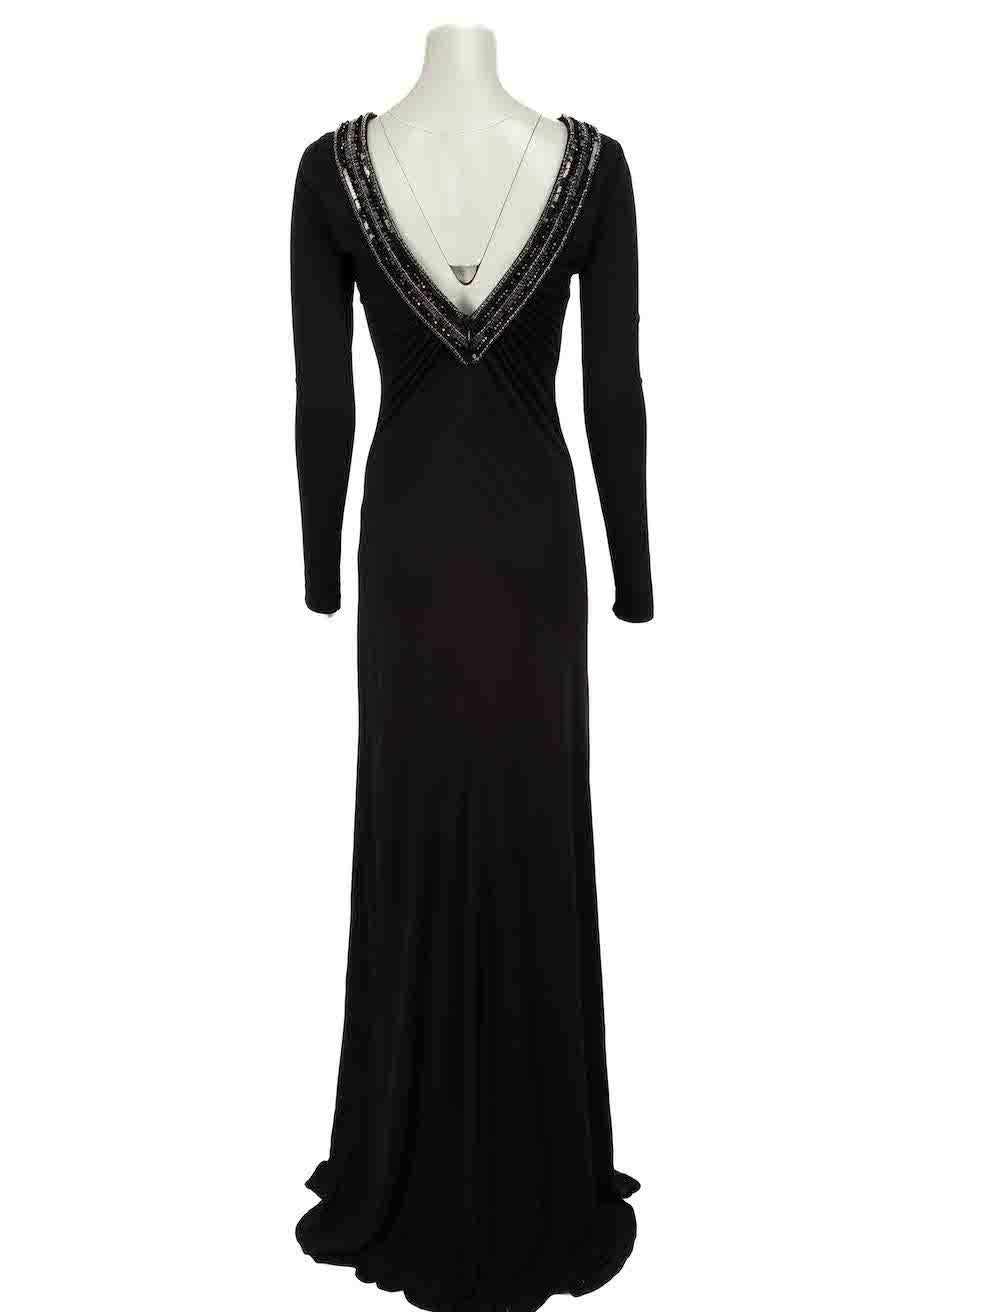 Emilio Pucci Black Embellished V-Neck Dress Size S In Good Condition In London, GB